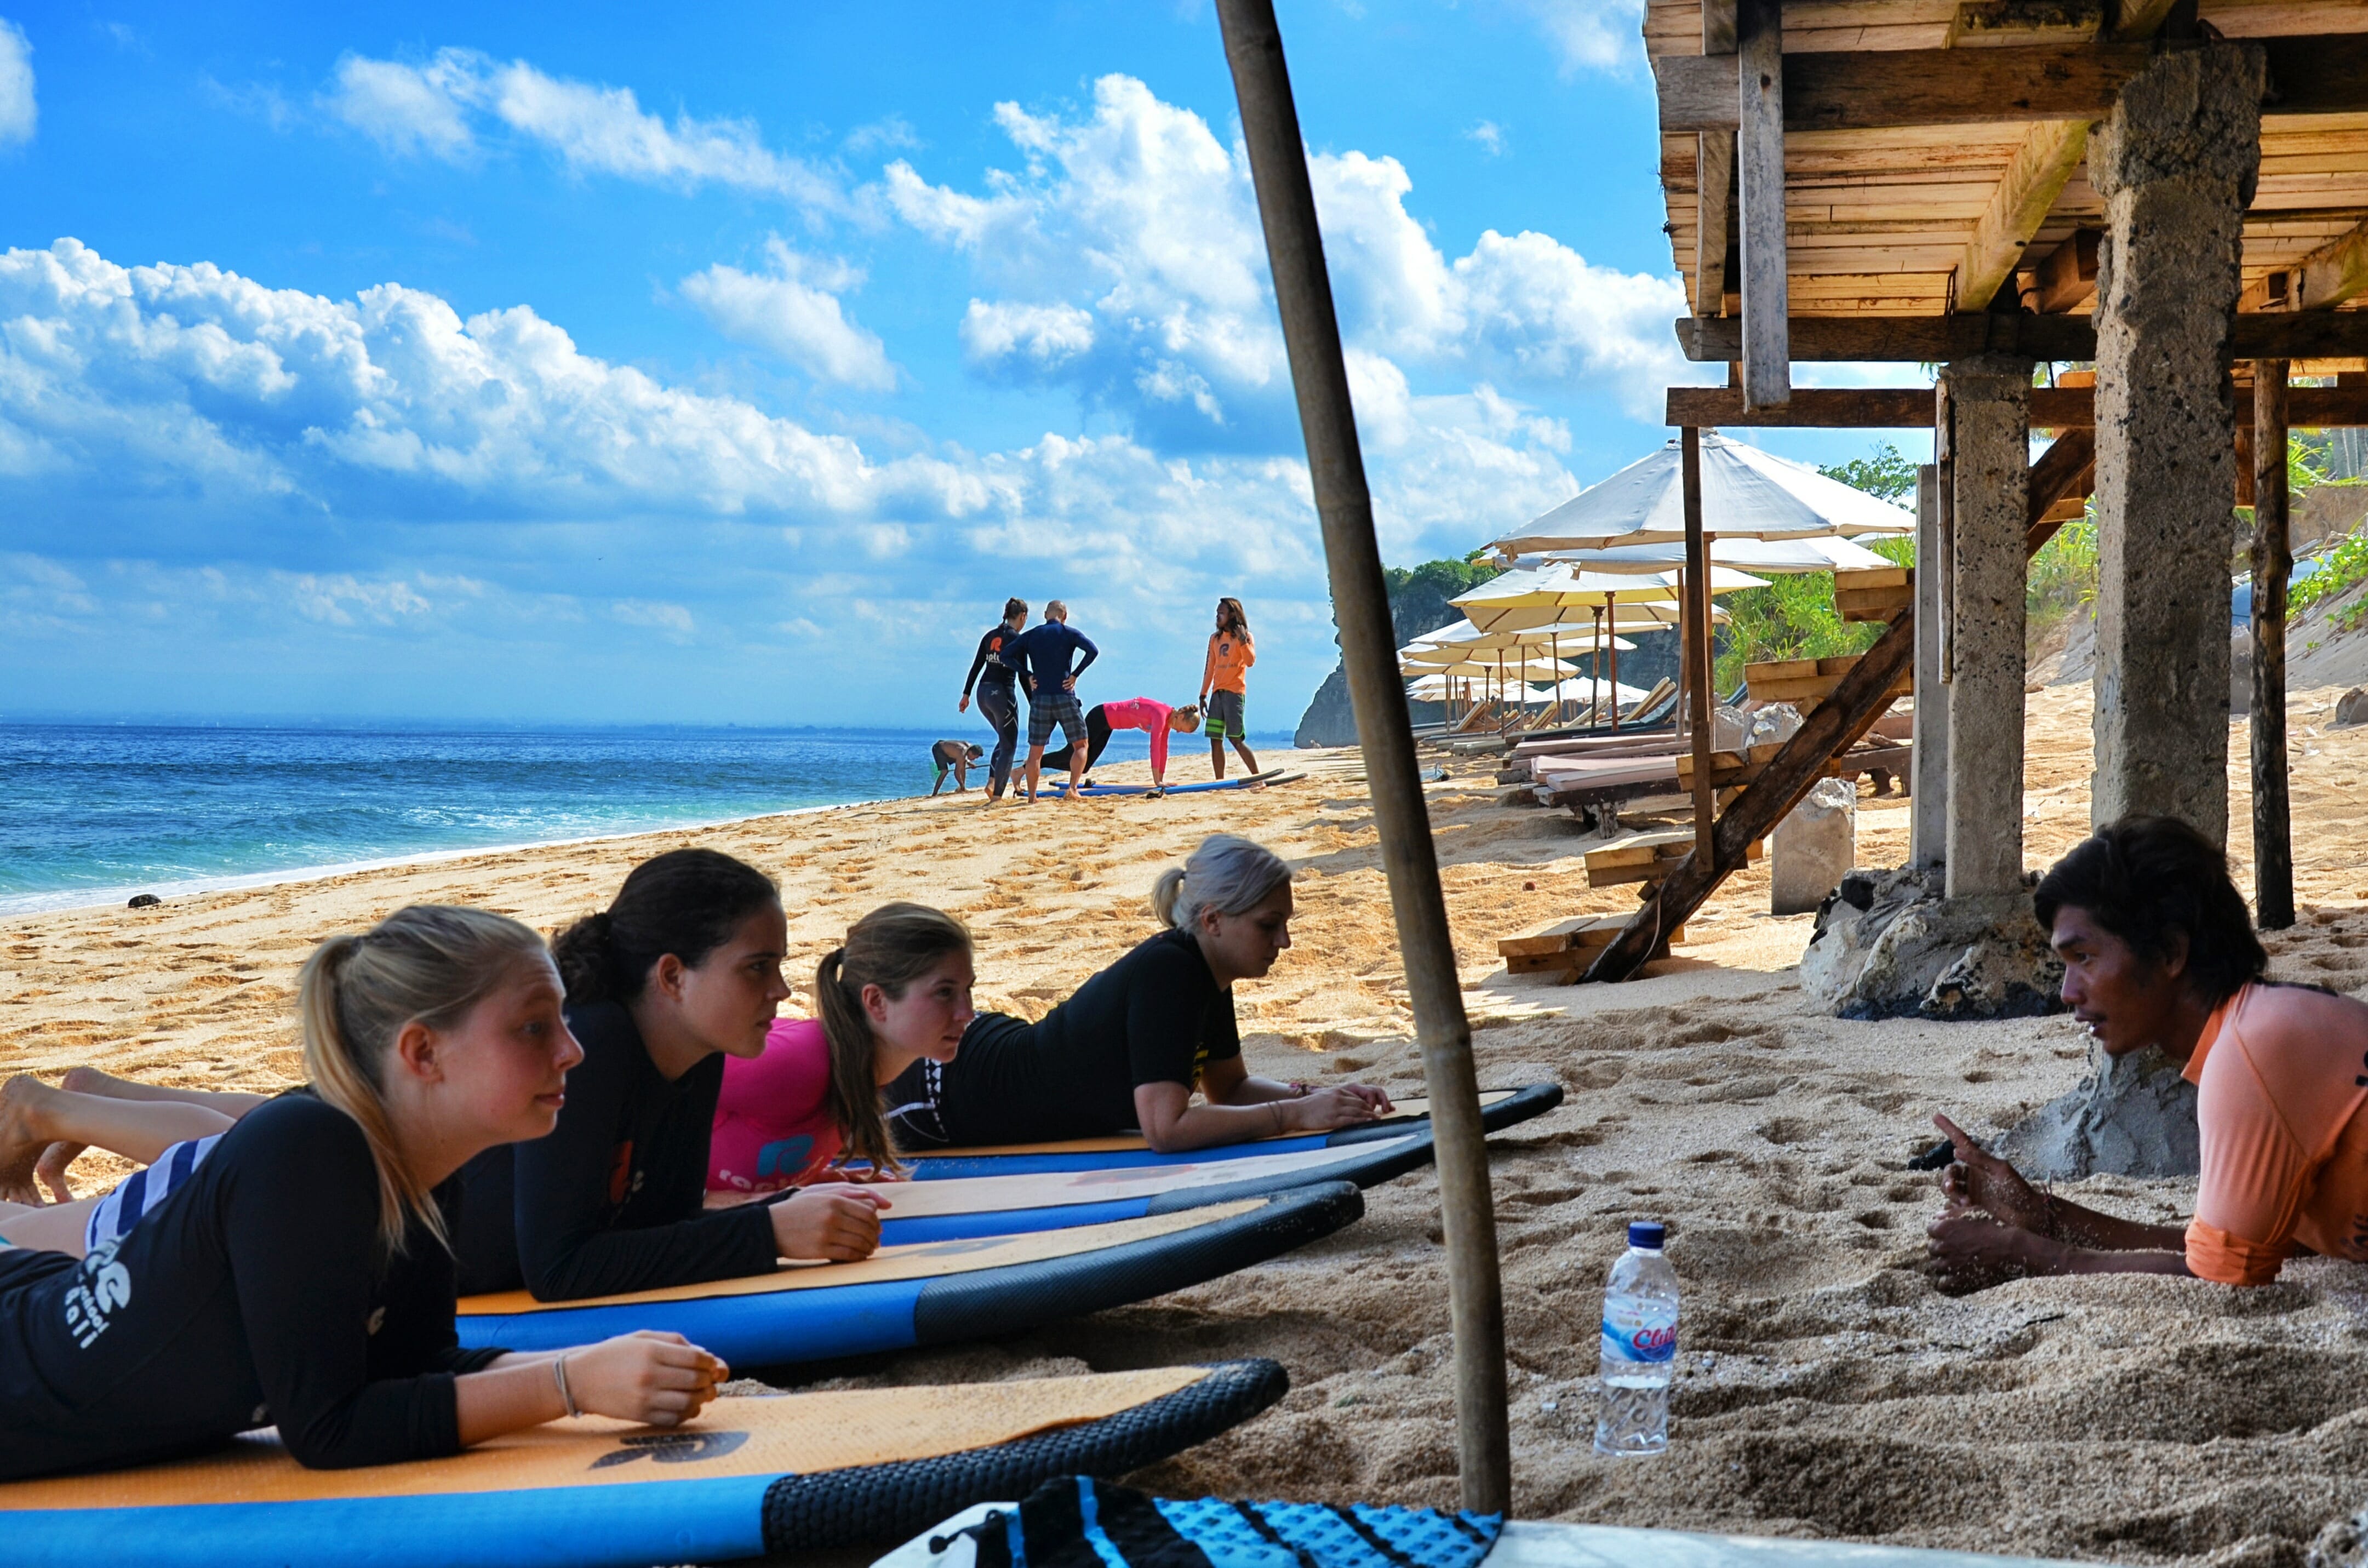 25 Reasons Why Everyone Loves Surfing - Rapture Surfcamps